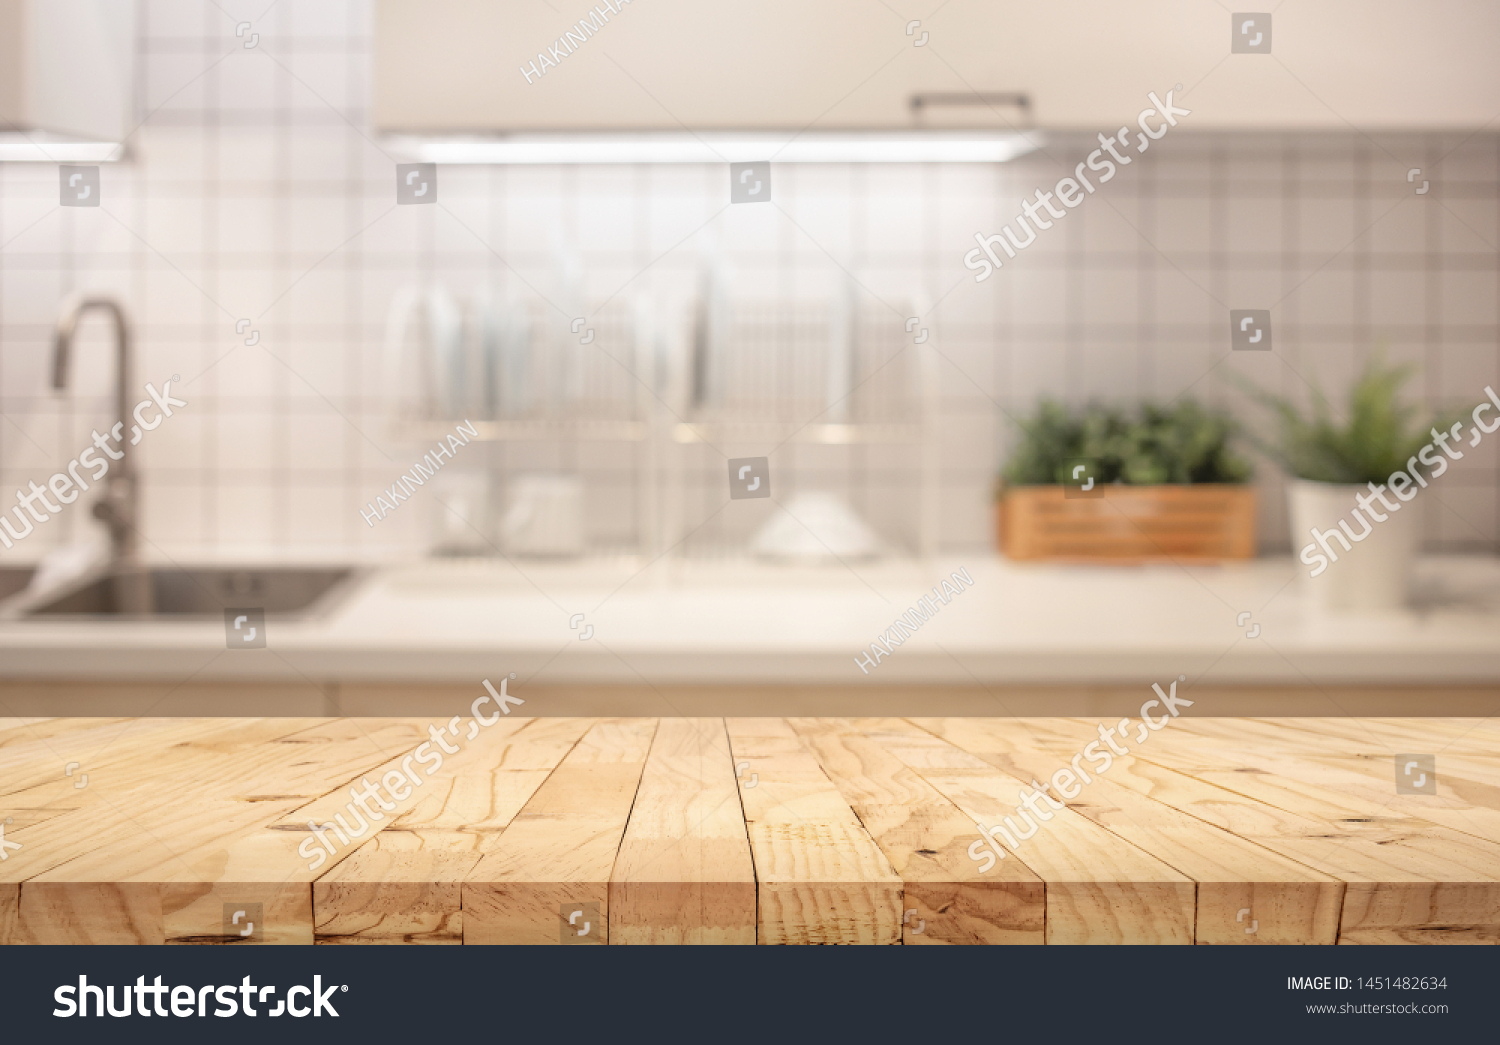 Wood table top on blur kitchen counter (room)background.For montage product display or design key visual layout. #1451482634